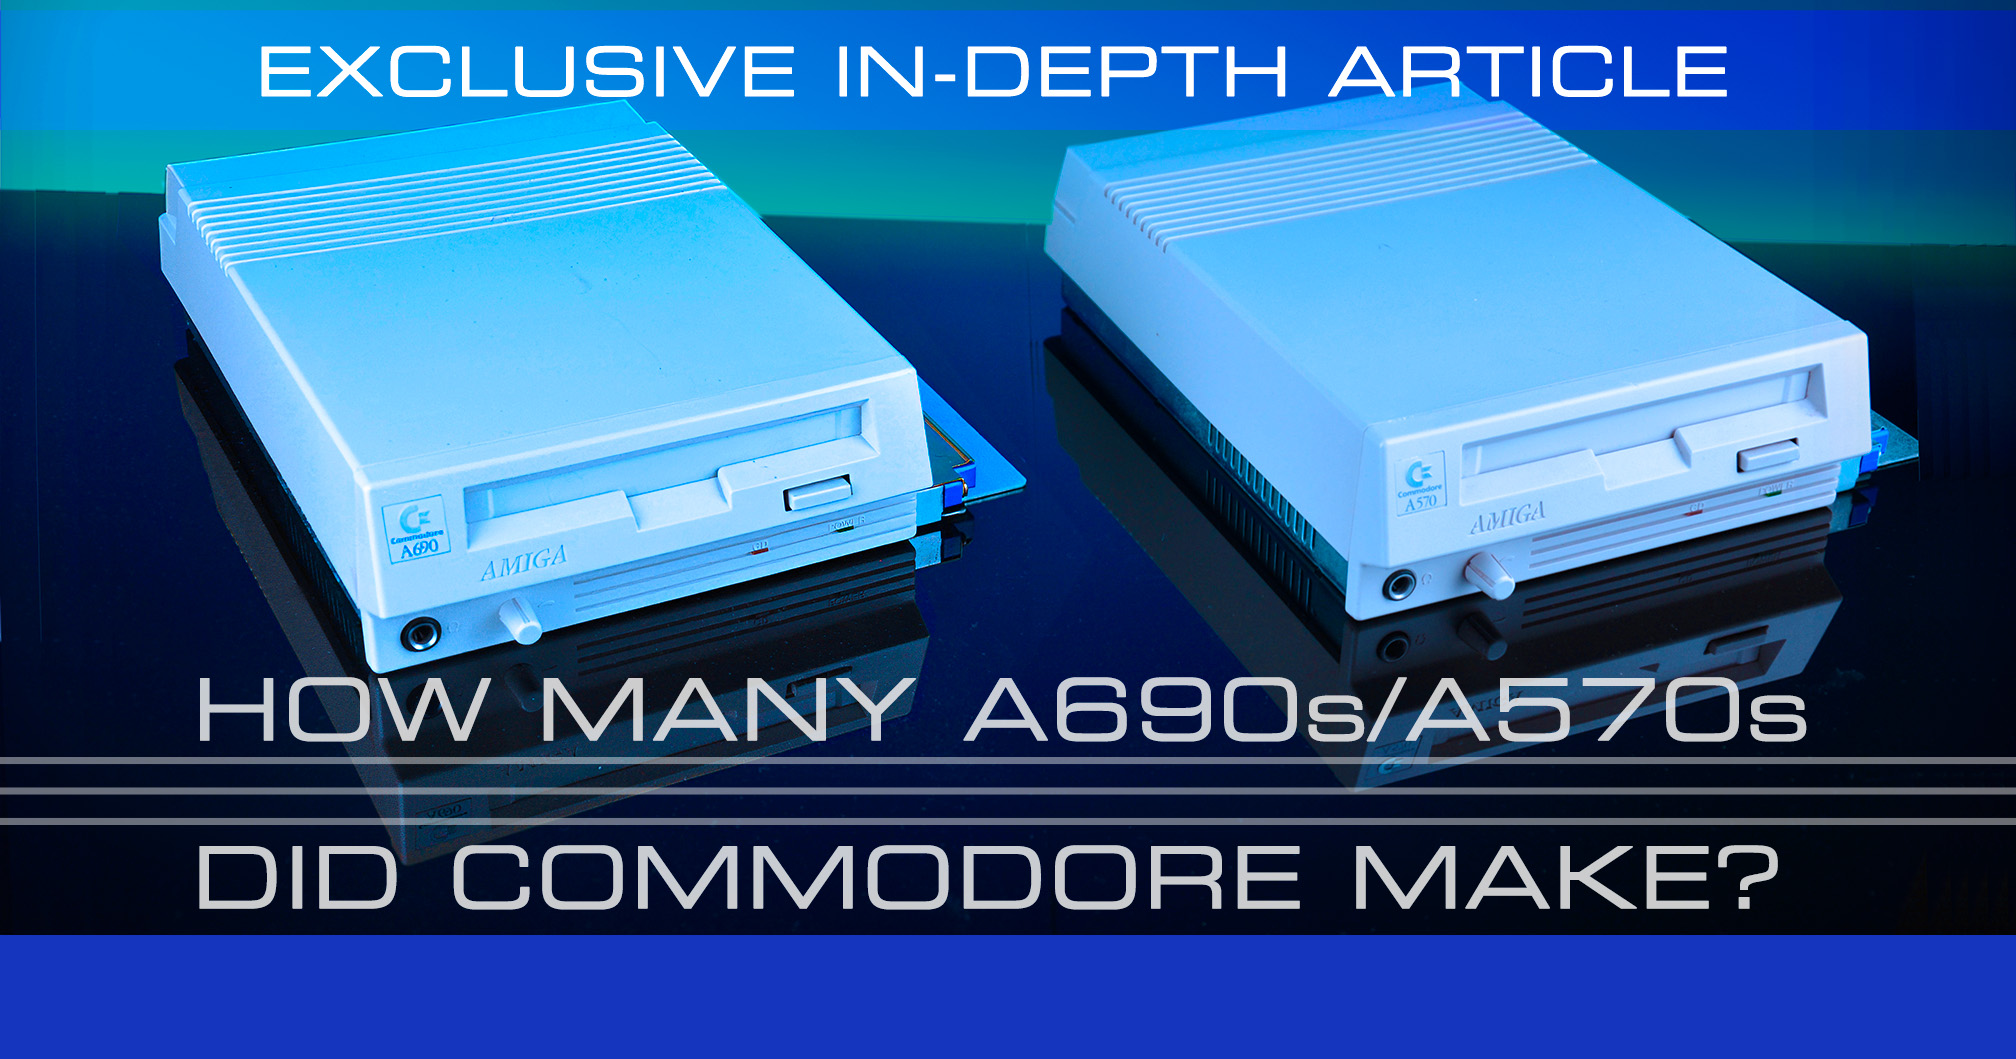 How Many A690 A570 CD-ROM Drives Did Commodore Make?